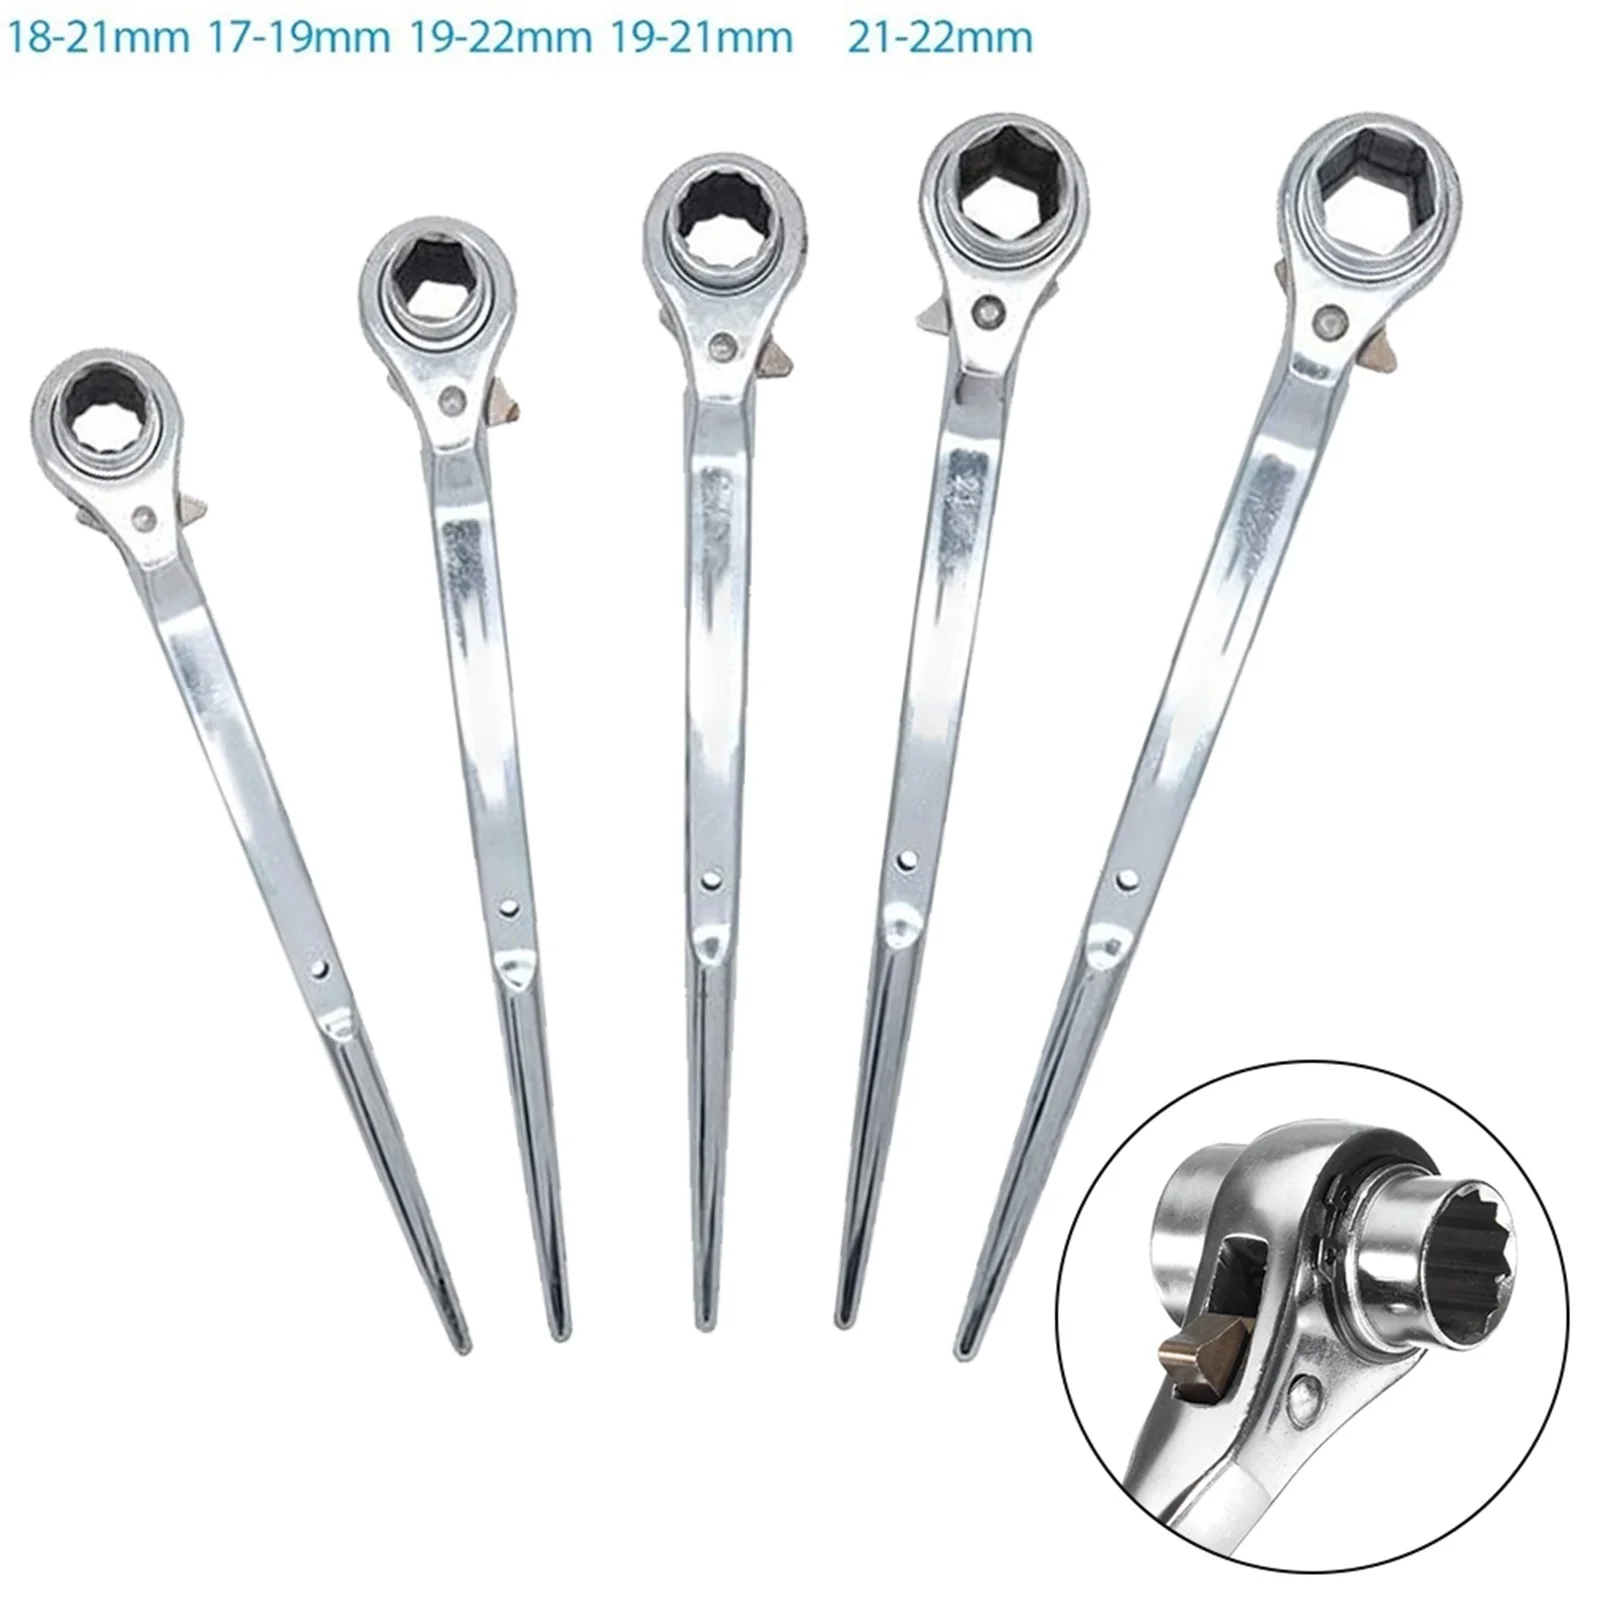 

1PC 17-22mm Ratchet Wrench Universal Head Sharp End Socket Wrench Podger Spanner Double-headed Hand Tools